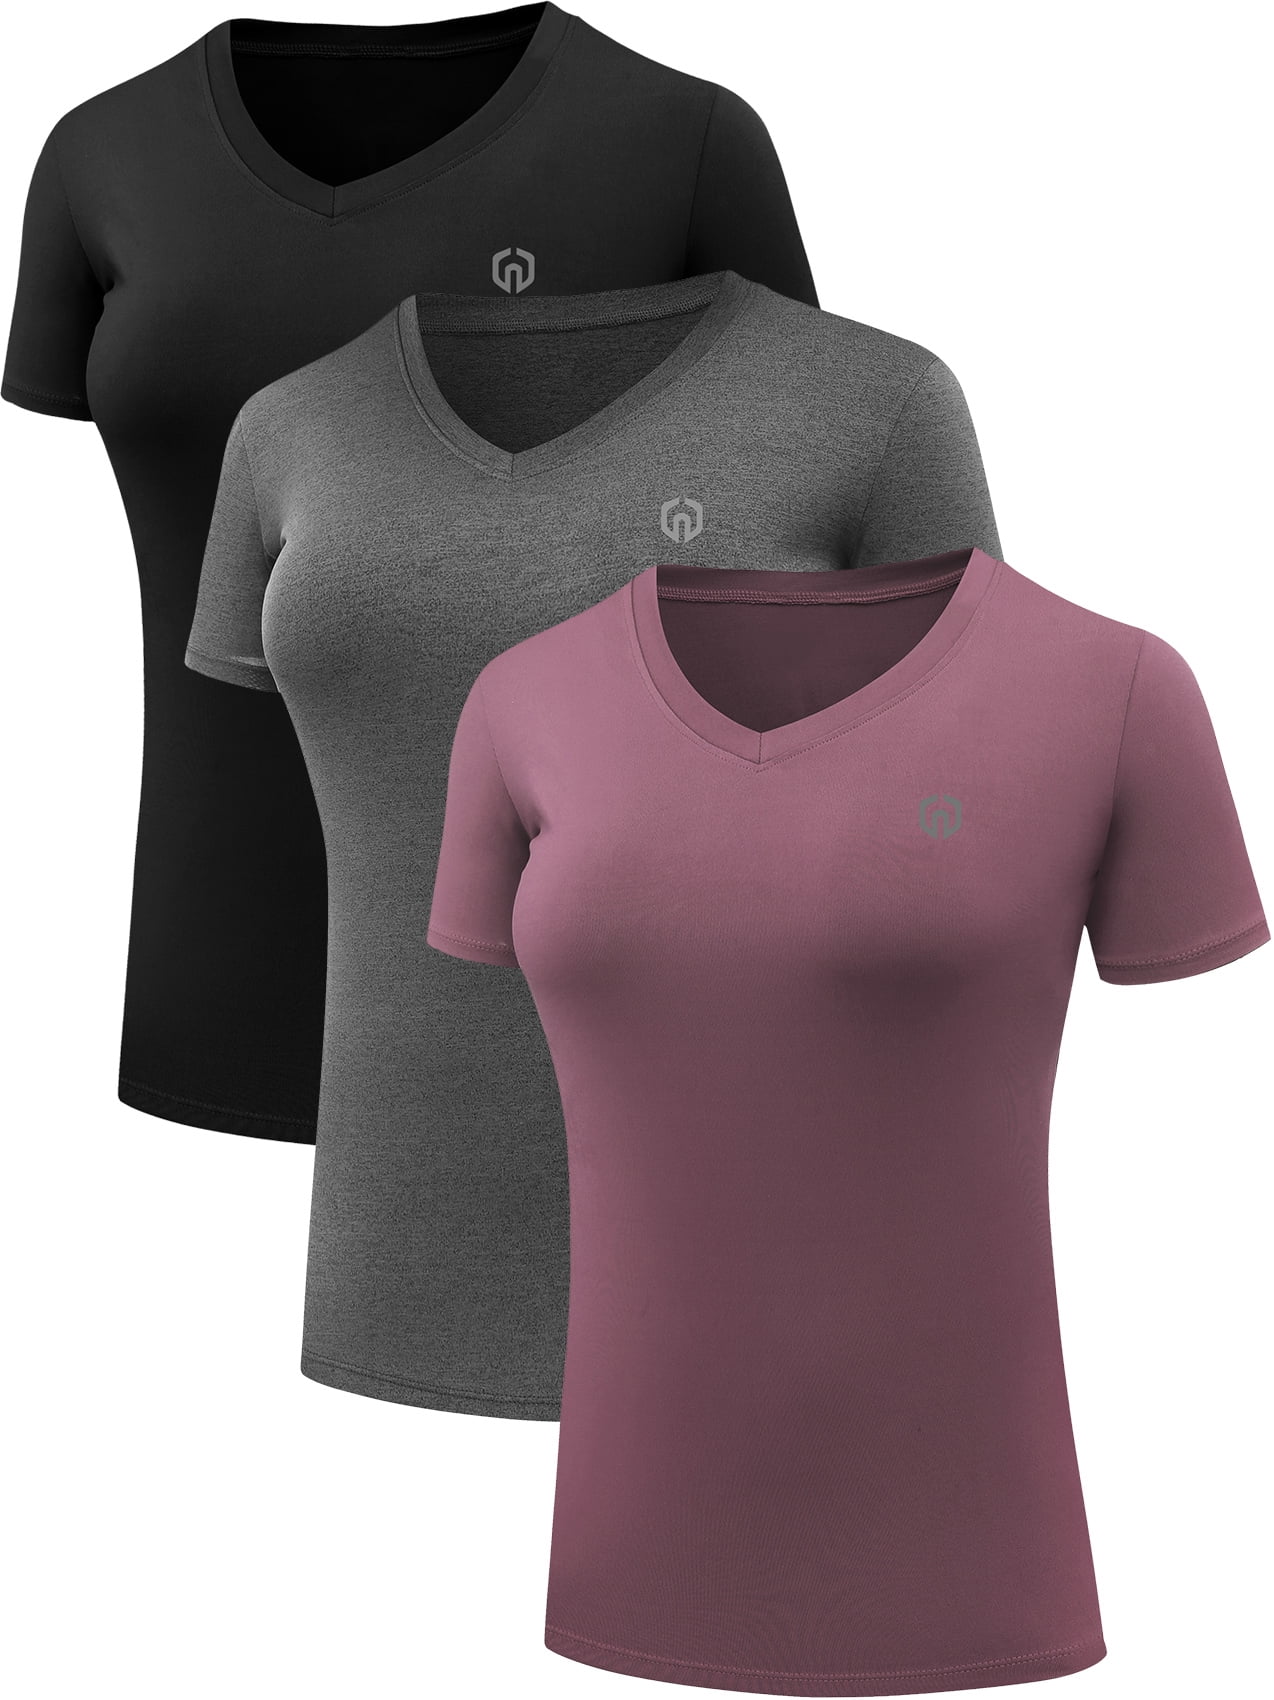 NELEUS Women's Compression Workout Athletic Shirt Yoga Tight Tops Short  Sleeves 3 Pack,Black+Gray+Rosy Brown,US Size M 